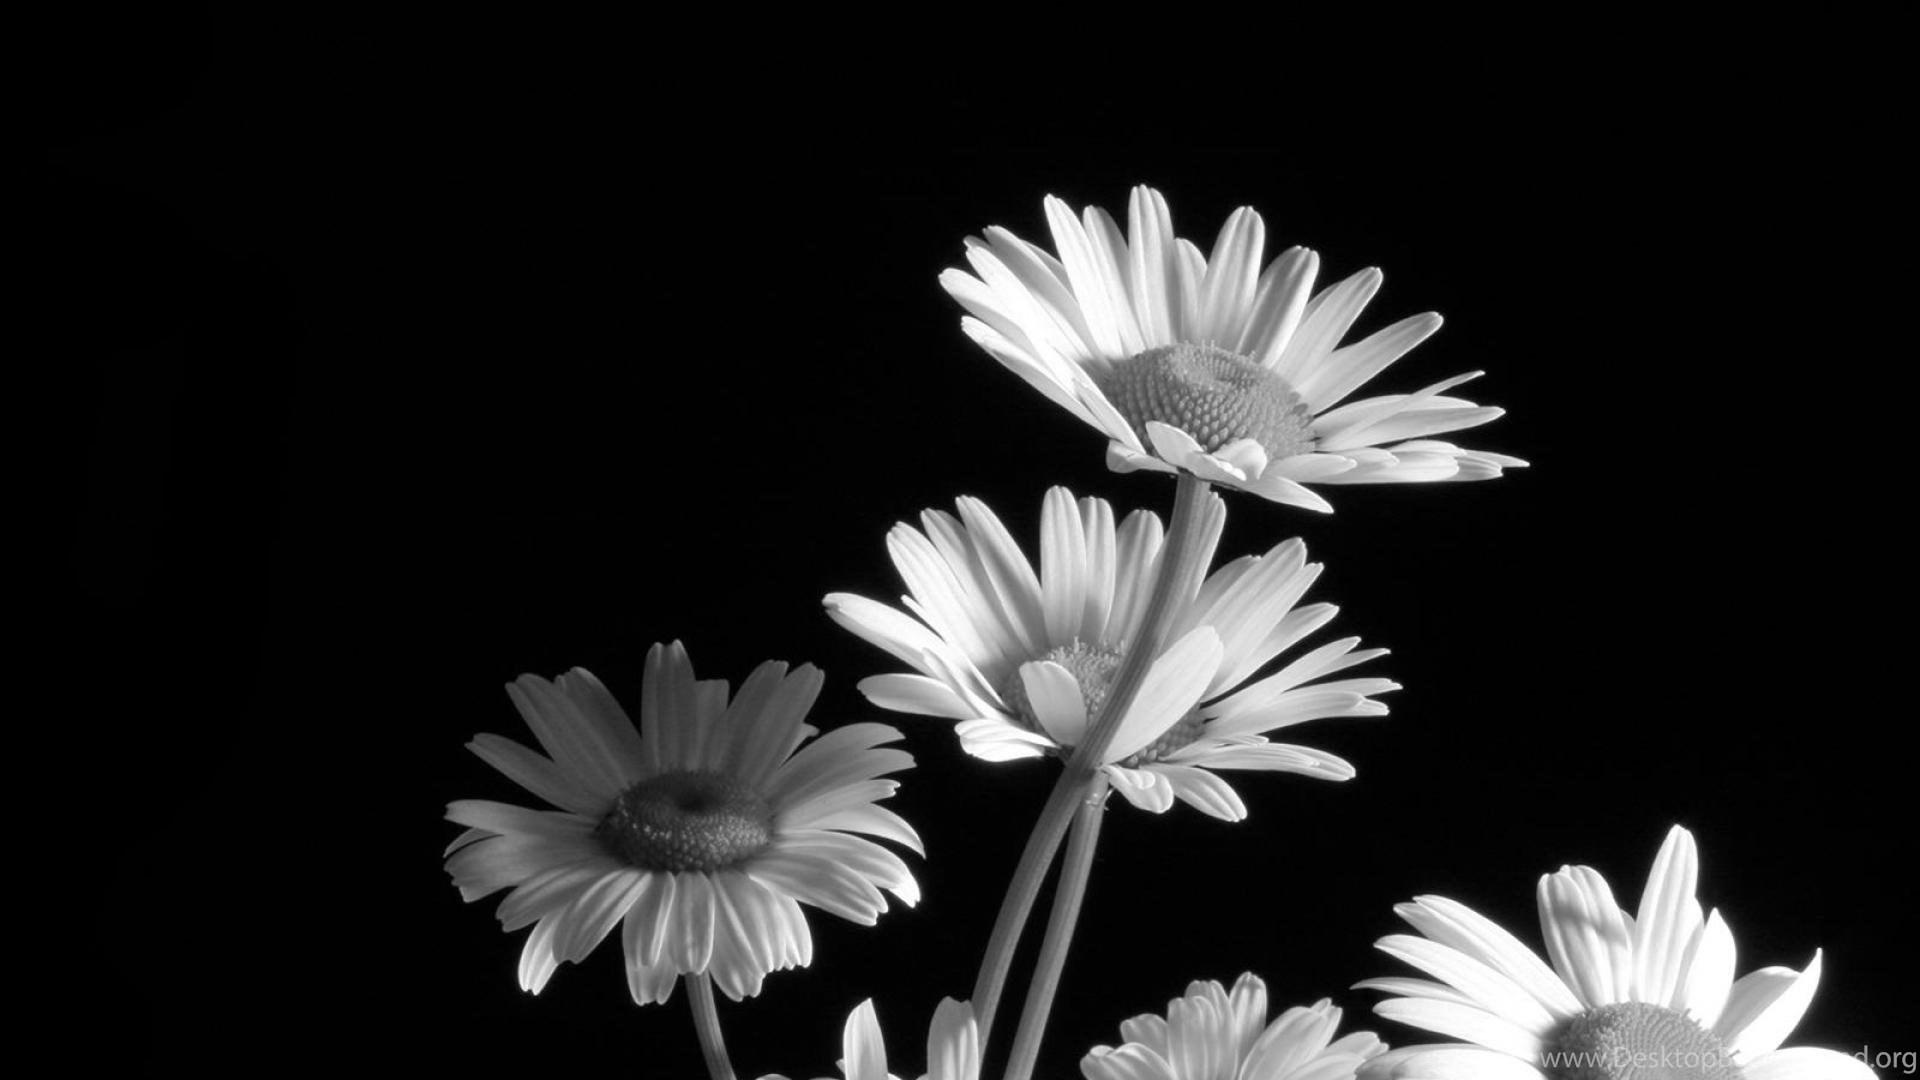 Black And White Flower Wallpapers » WallDevil Best Free HD ...